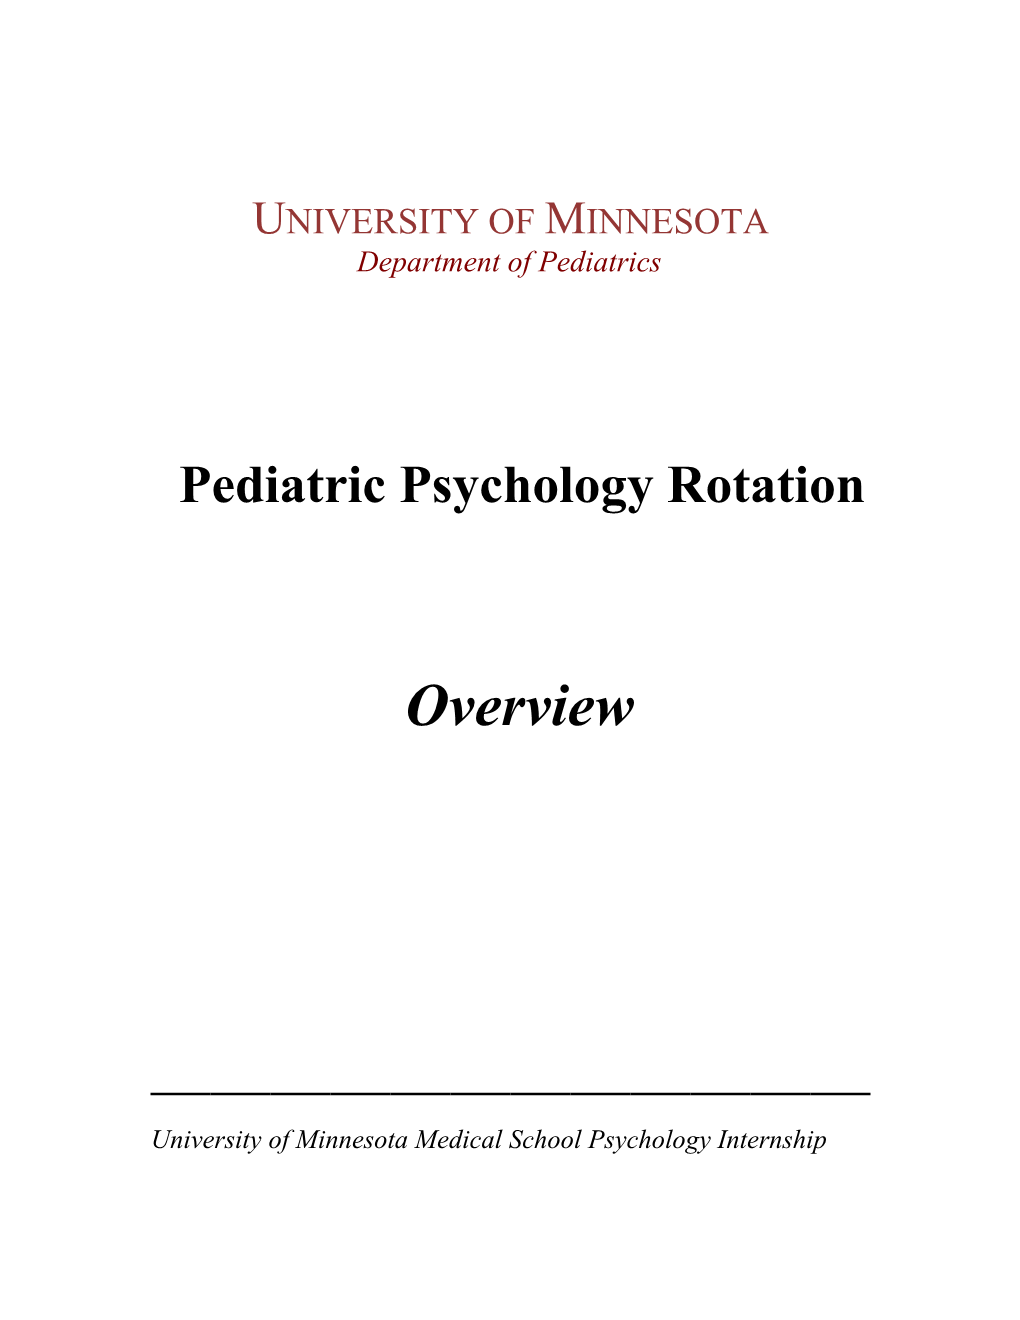 The Pediatric Psychology Rotation Is in the Division of General Pediatrics and Adolescent